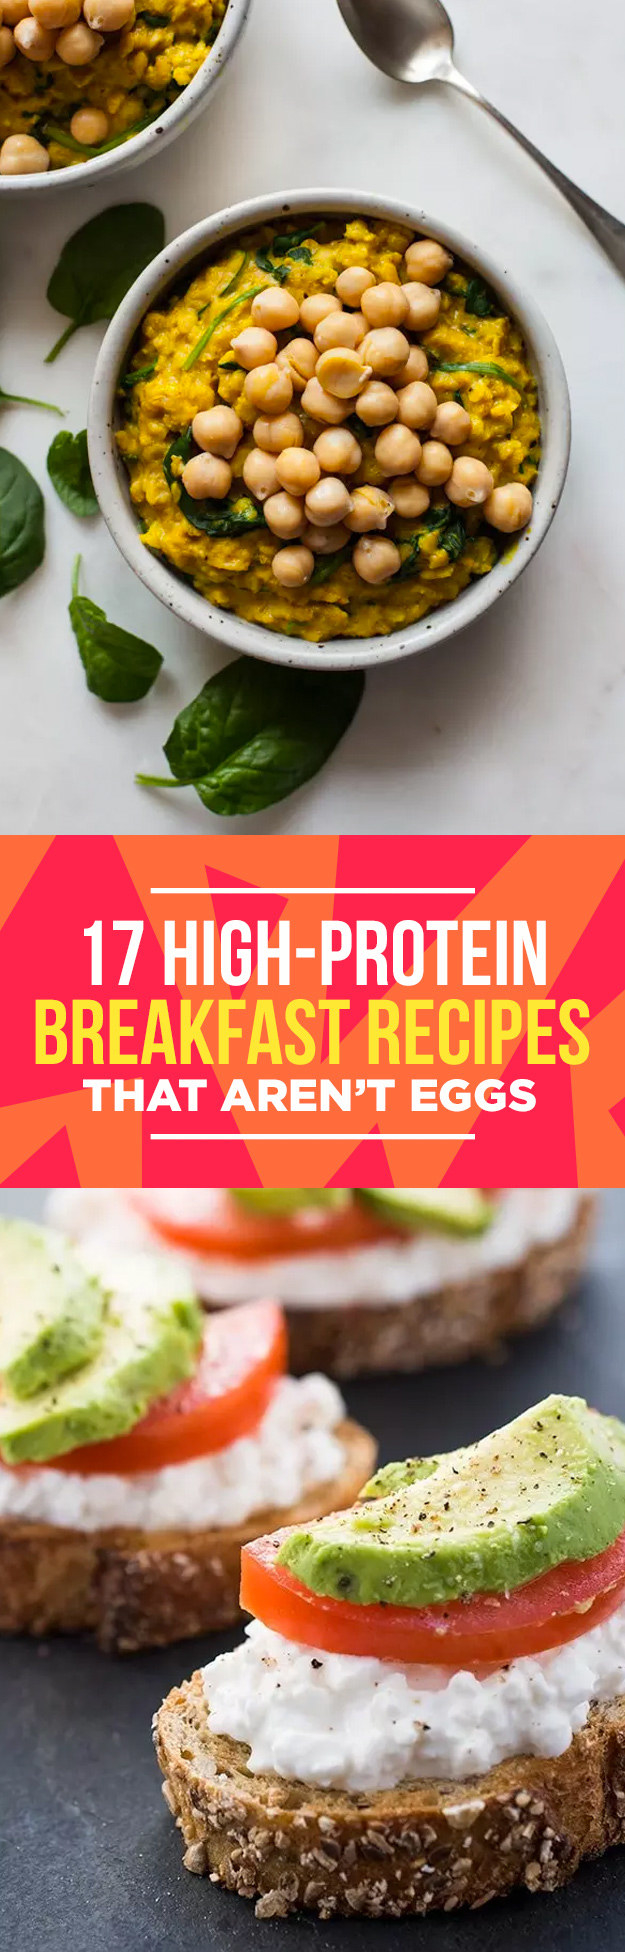 17 High-Protein Breakfast Recipes For People Who Don't ...